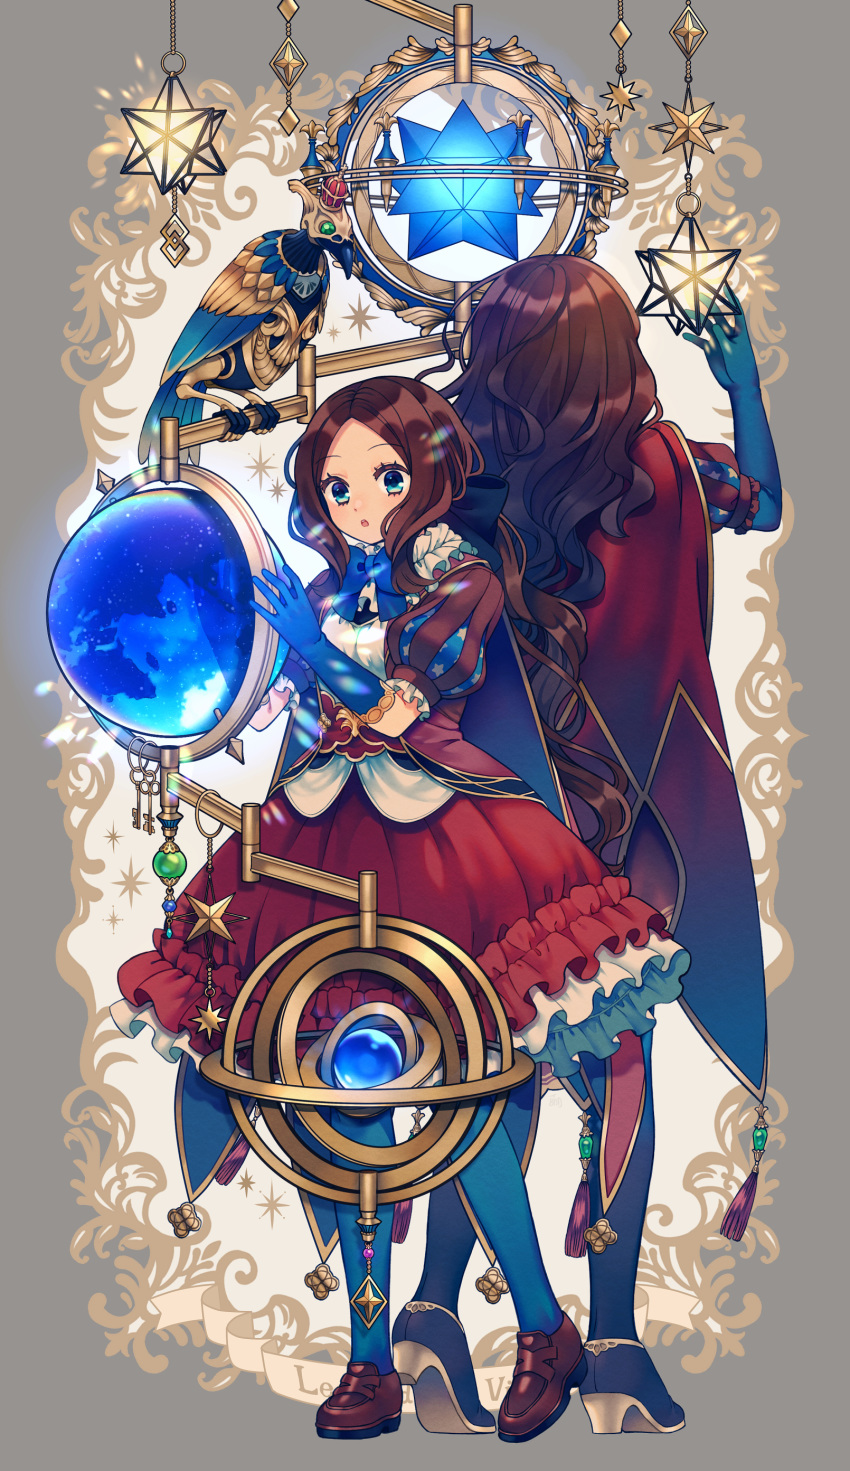 2girls absurdres bangs bird blue_eyes bow breasts brown_hair dress dual_persona edward-el fate/grand_order fate/grand_order_arcade fate_(series) forehead globe gloves hair_bow highres leonardo_da_vinci_(fate/grand_order) leonardo_da_vinci_(rider)_(fate) long_hair multiple_girls open_mouth pantyhose parted_bangs ponytail puff_and_slash_sleeves puffy_short_sleeves puffy_sleeves saint_quartz short_hair short_sleeves skirt small_breasts